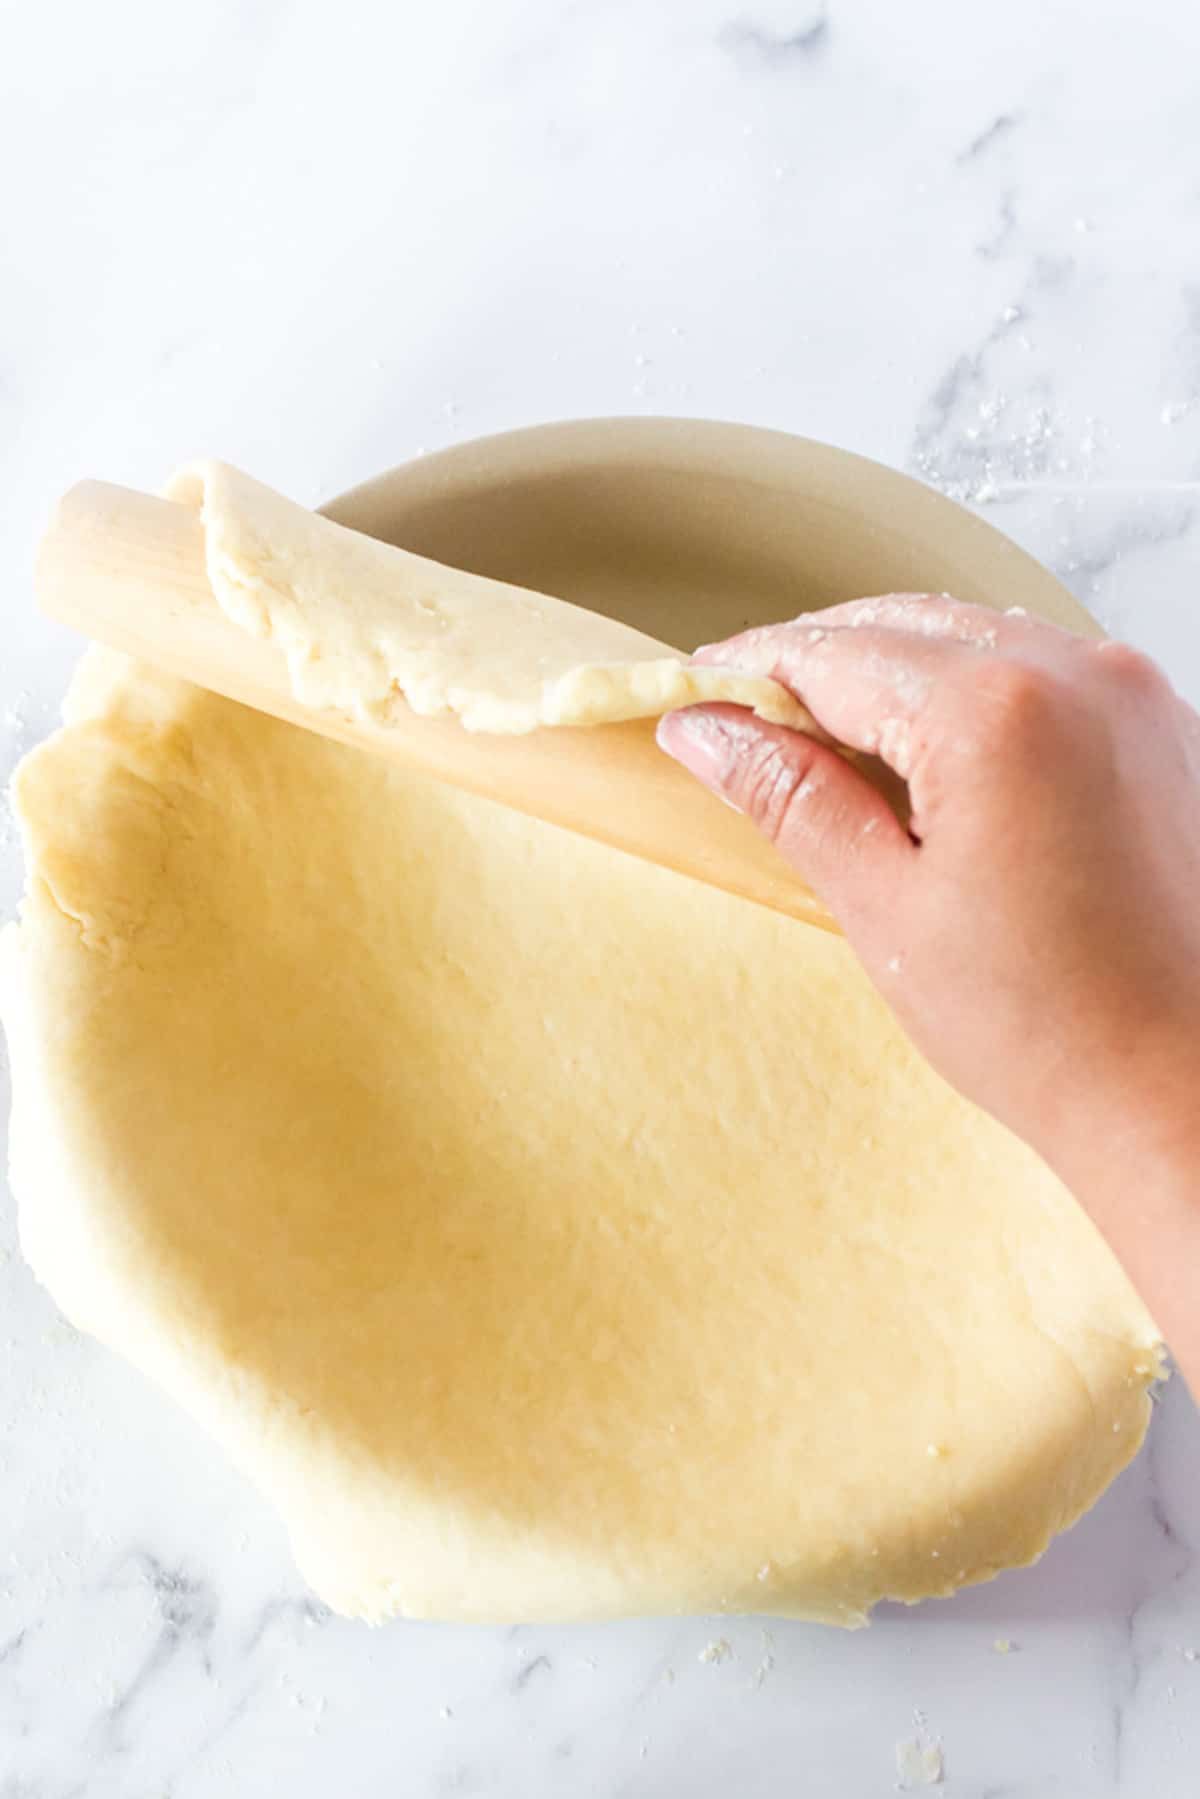 Slipping a dough from a rolling pin to a pie plate.